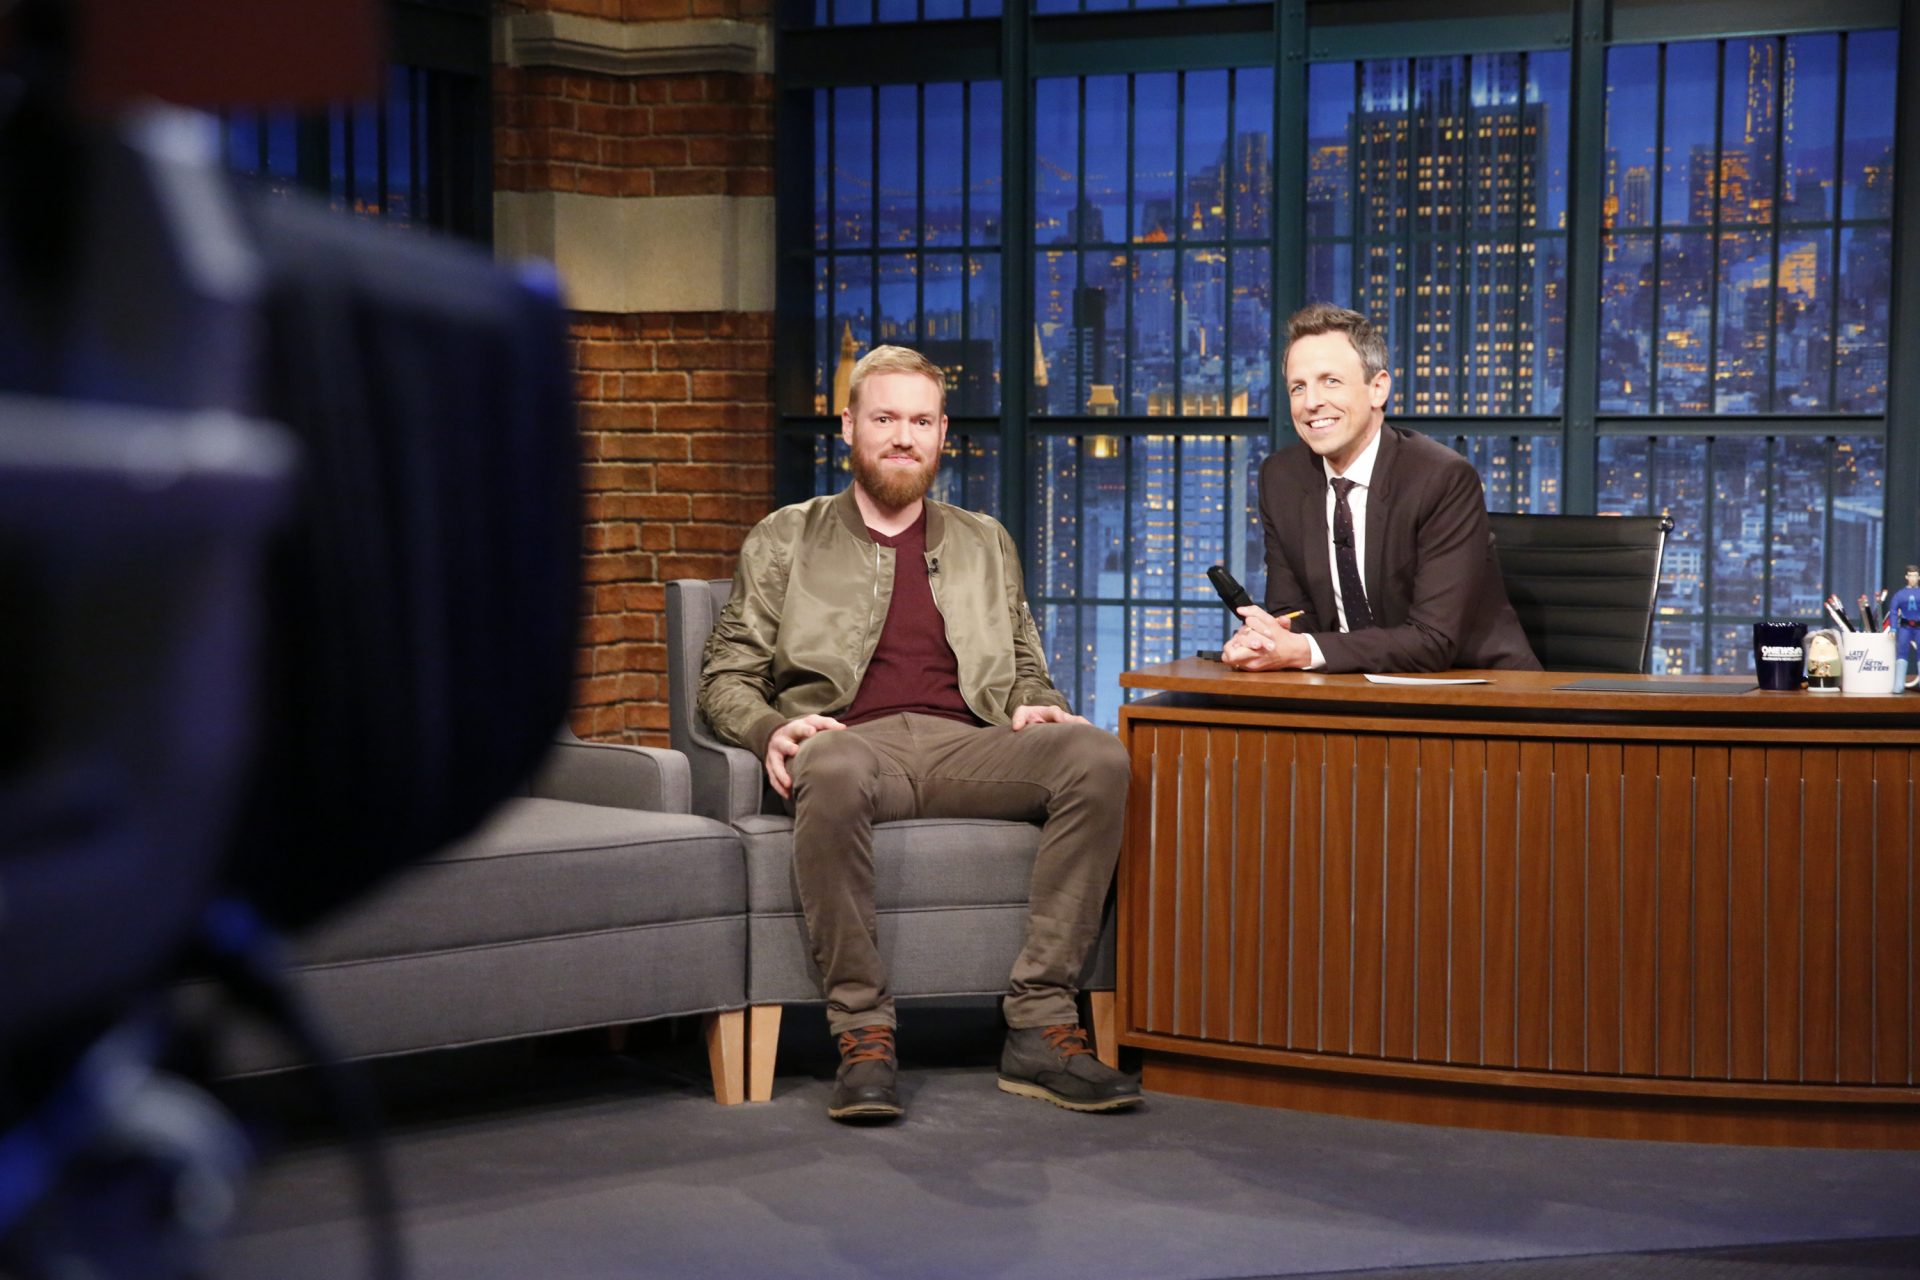 His late-night debut on Seth Meyers